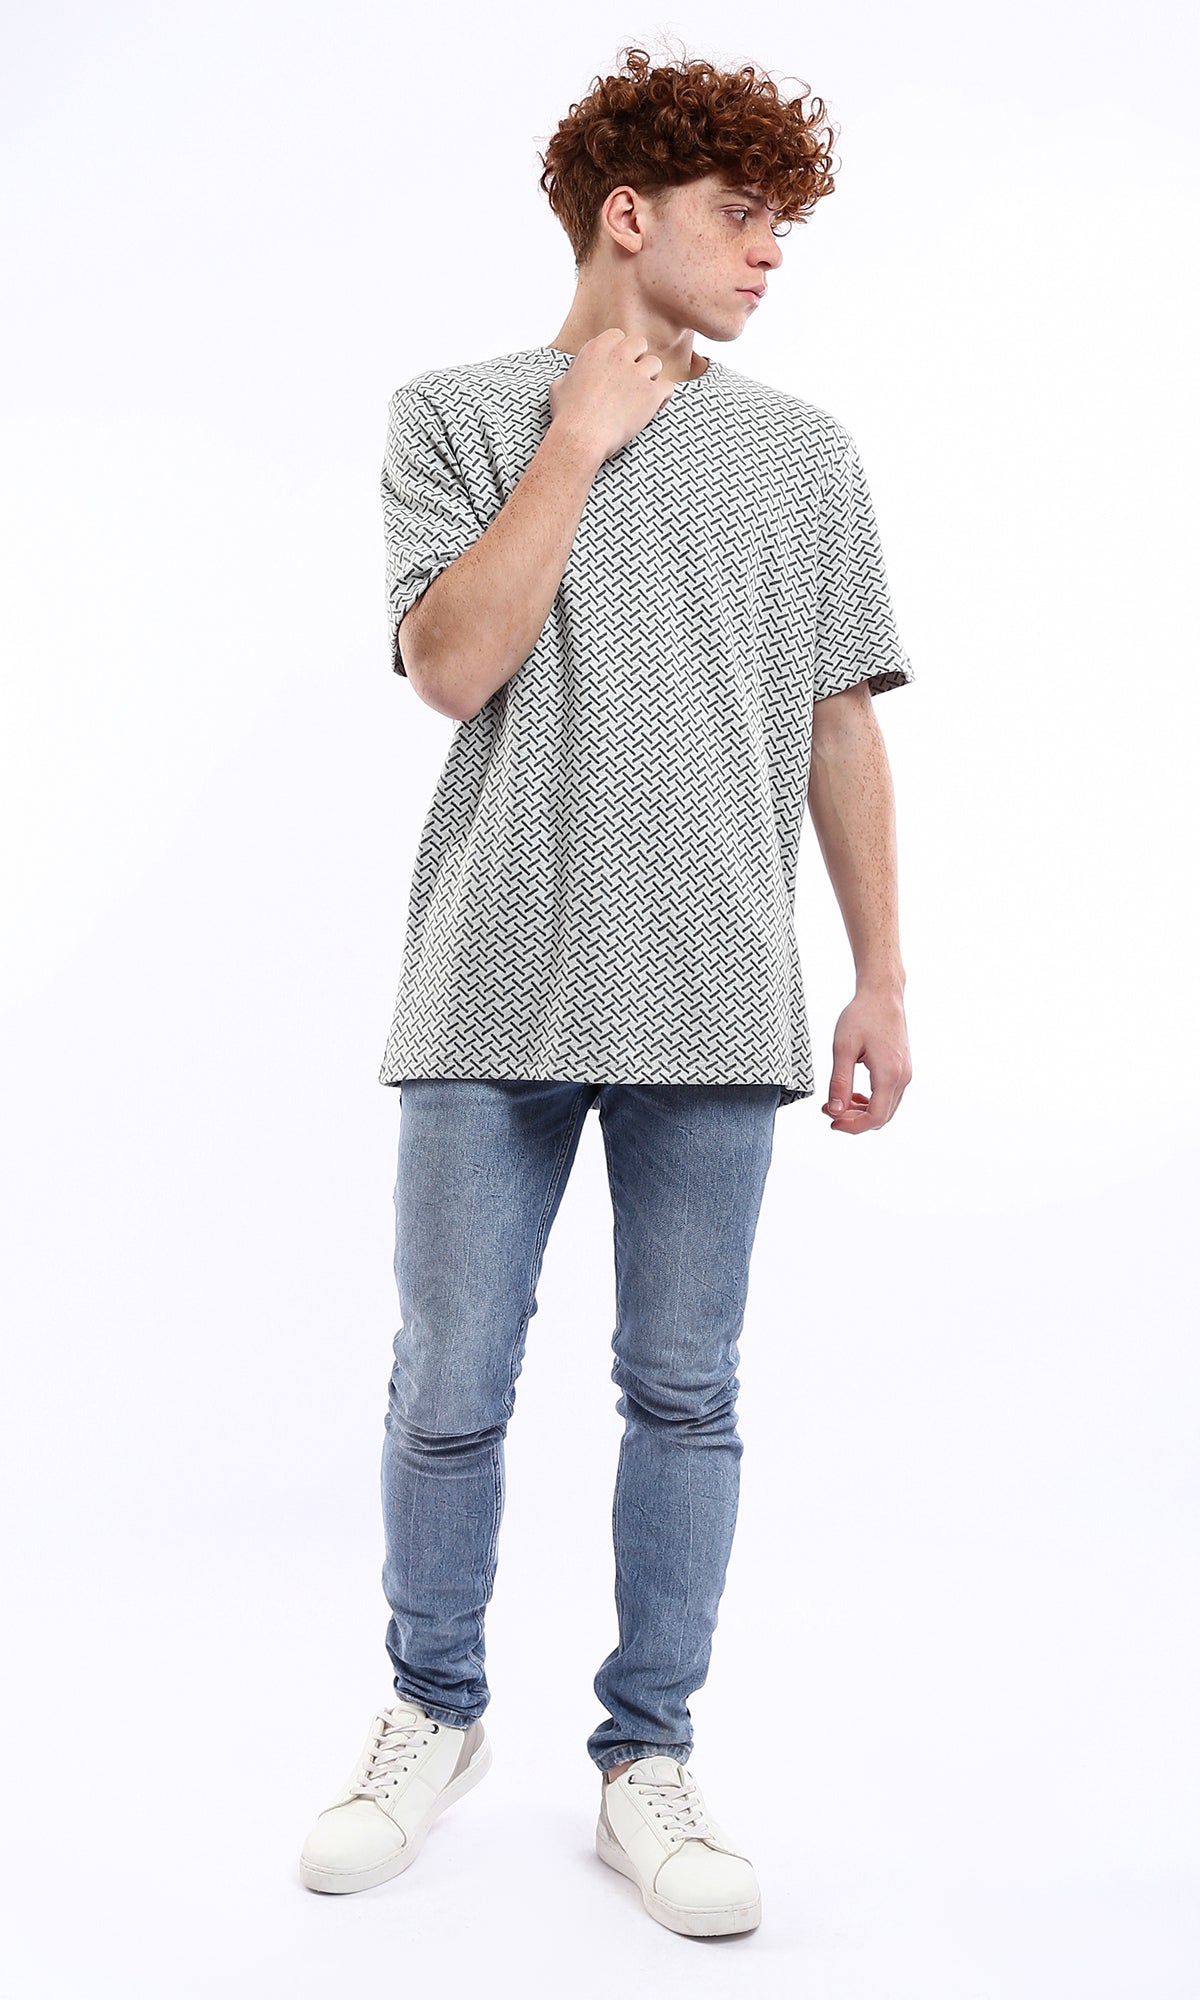 O178555 Medium-Weight Patterned Grey Casual Tee